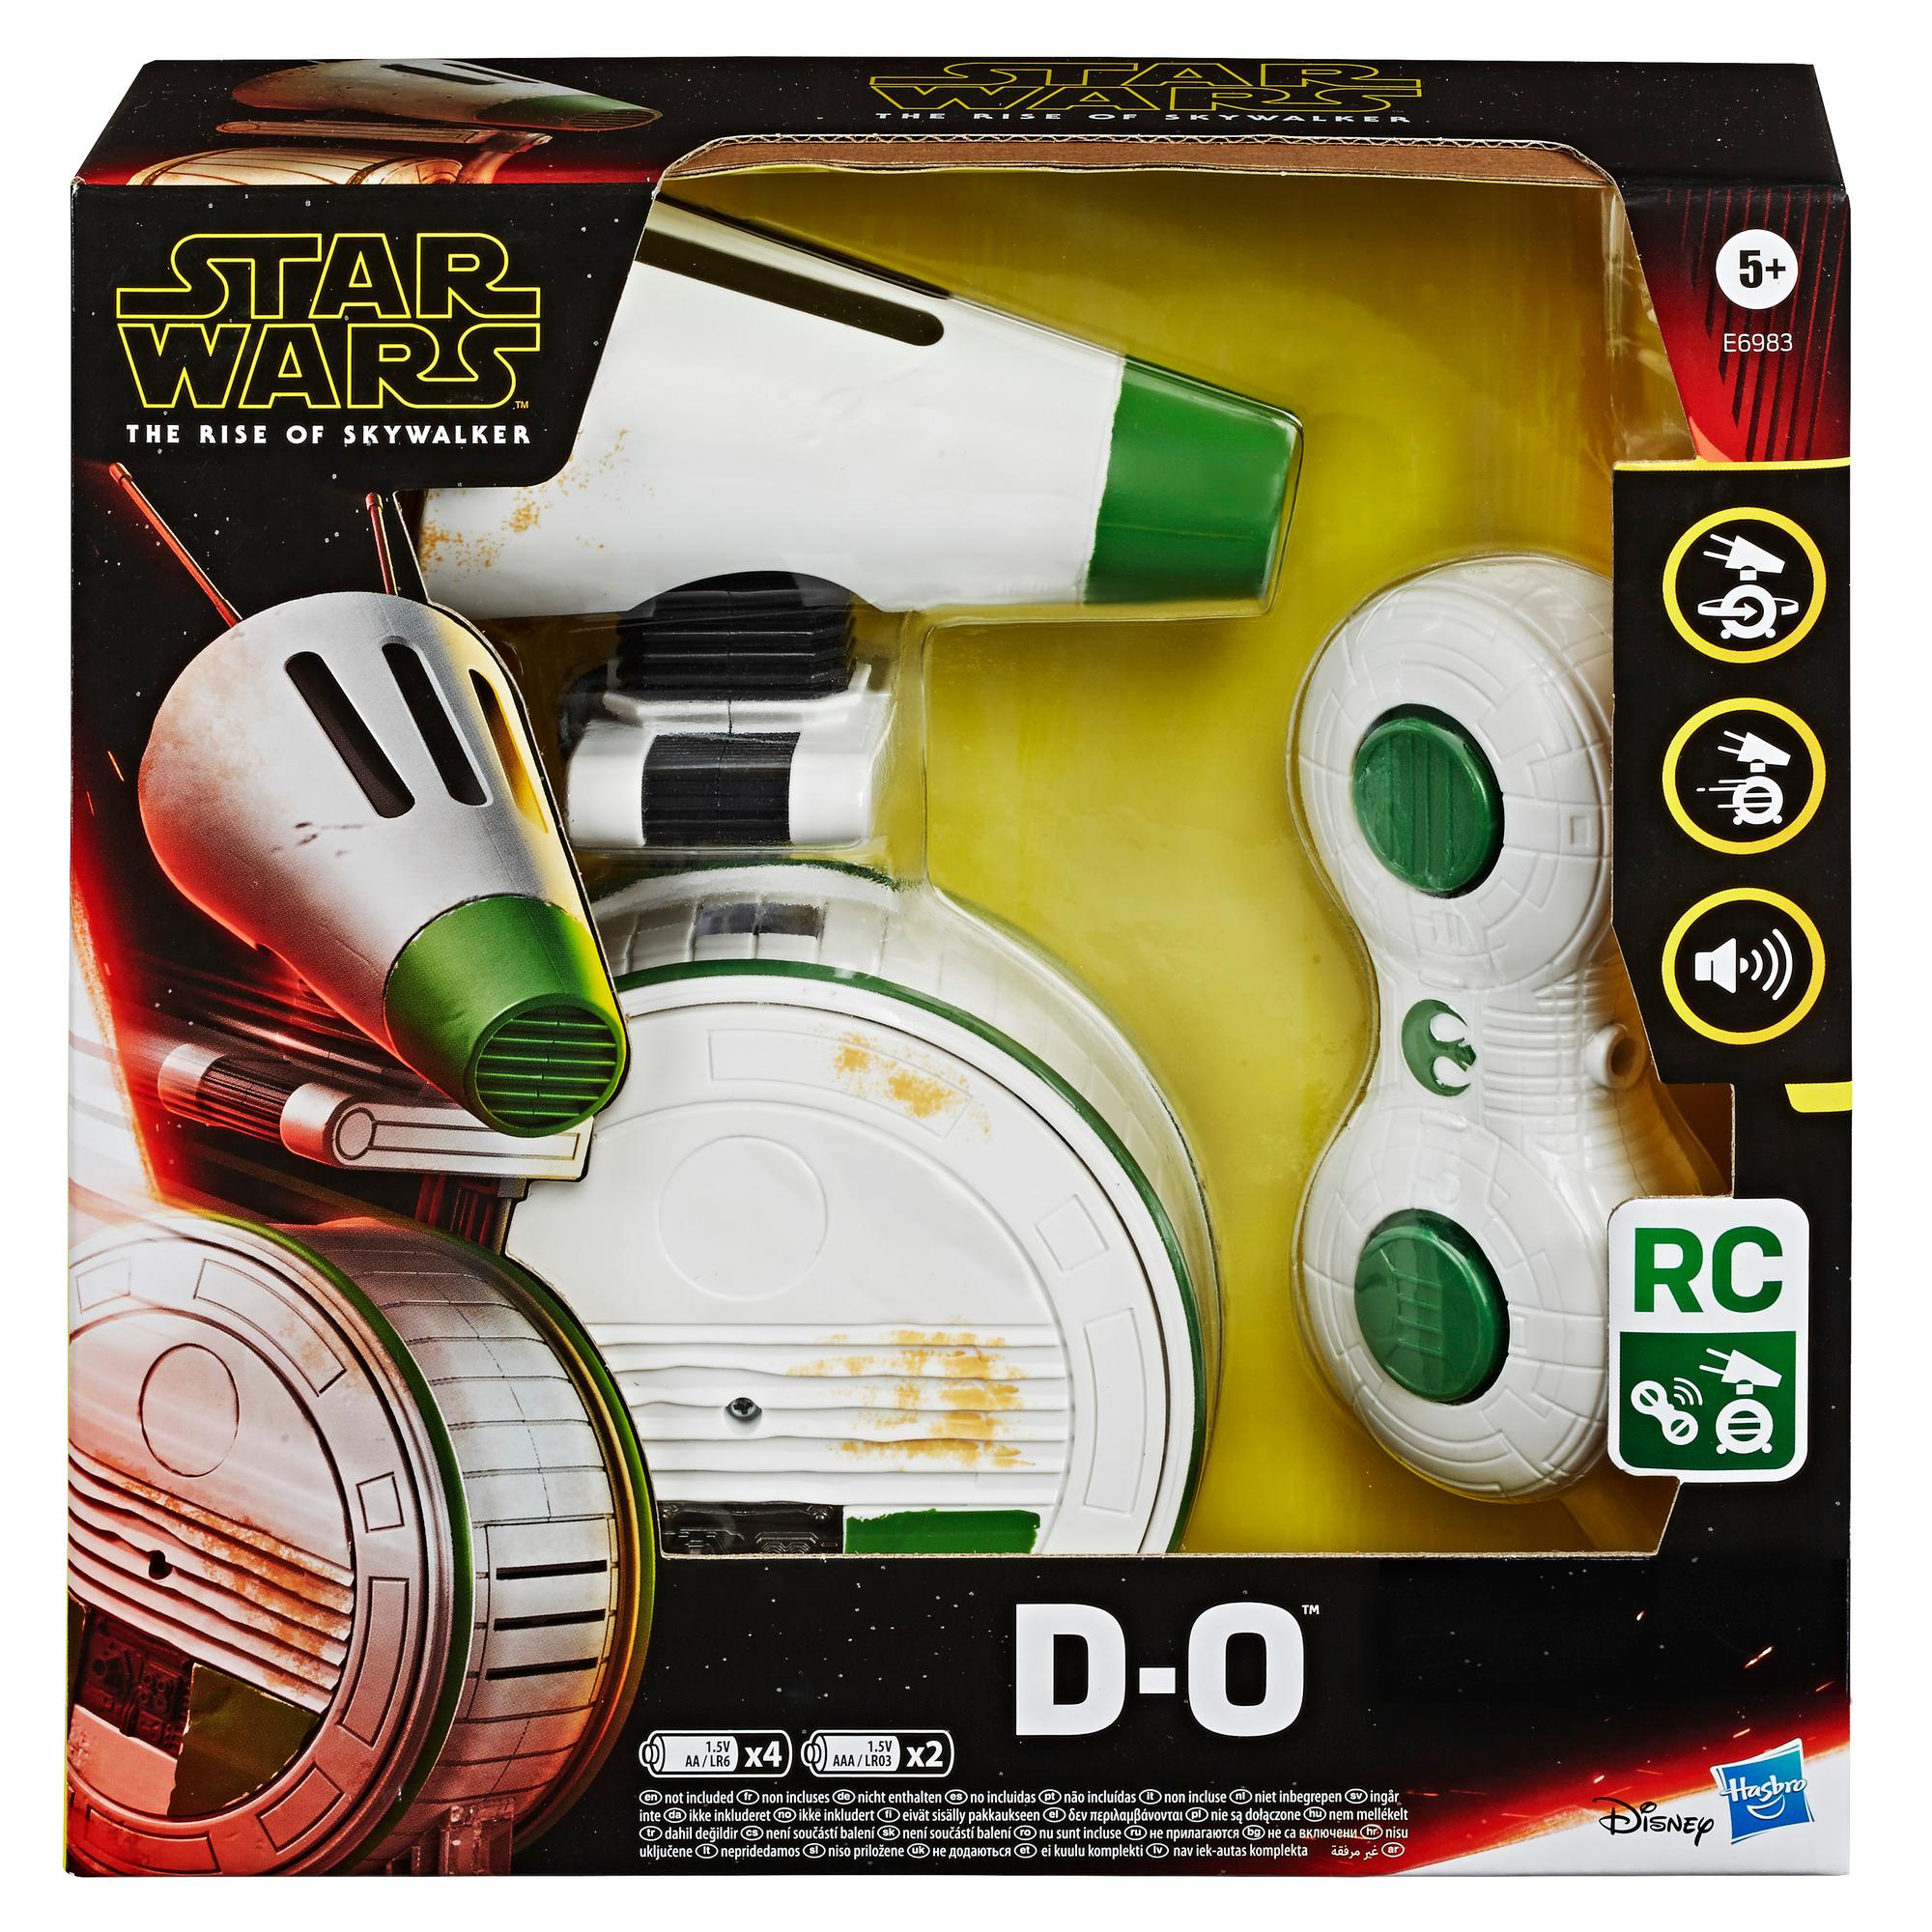 Star Wars Remote Control D-O Rolling Electronic Droid Toy